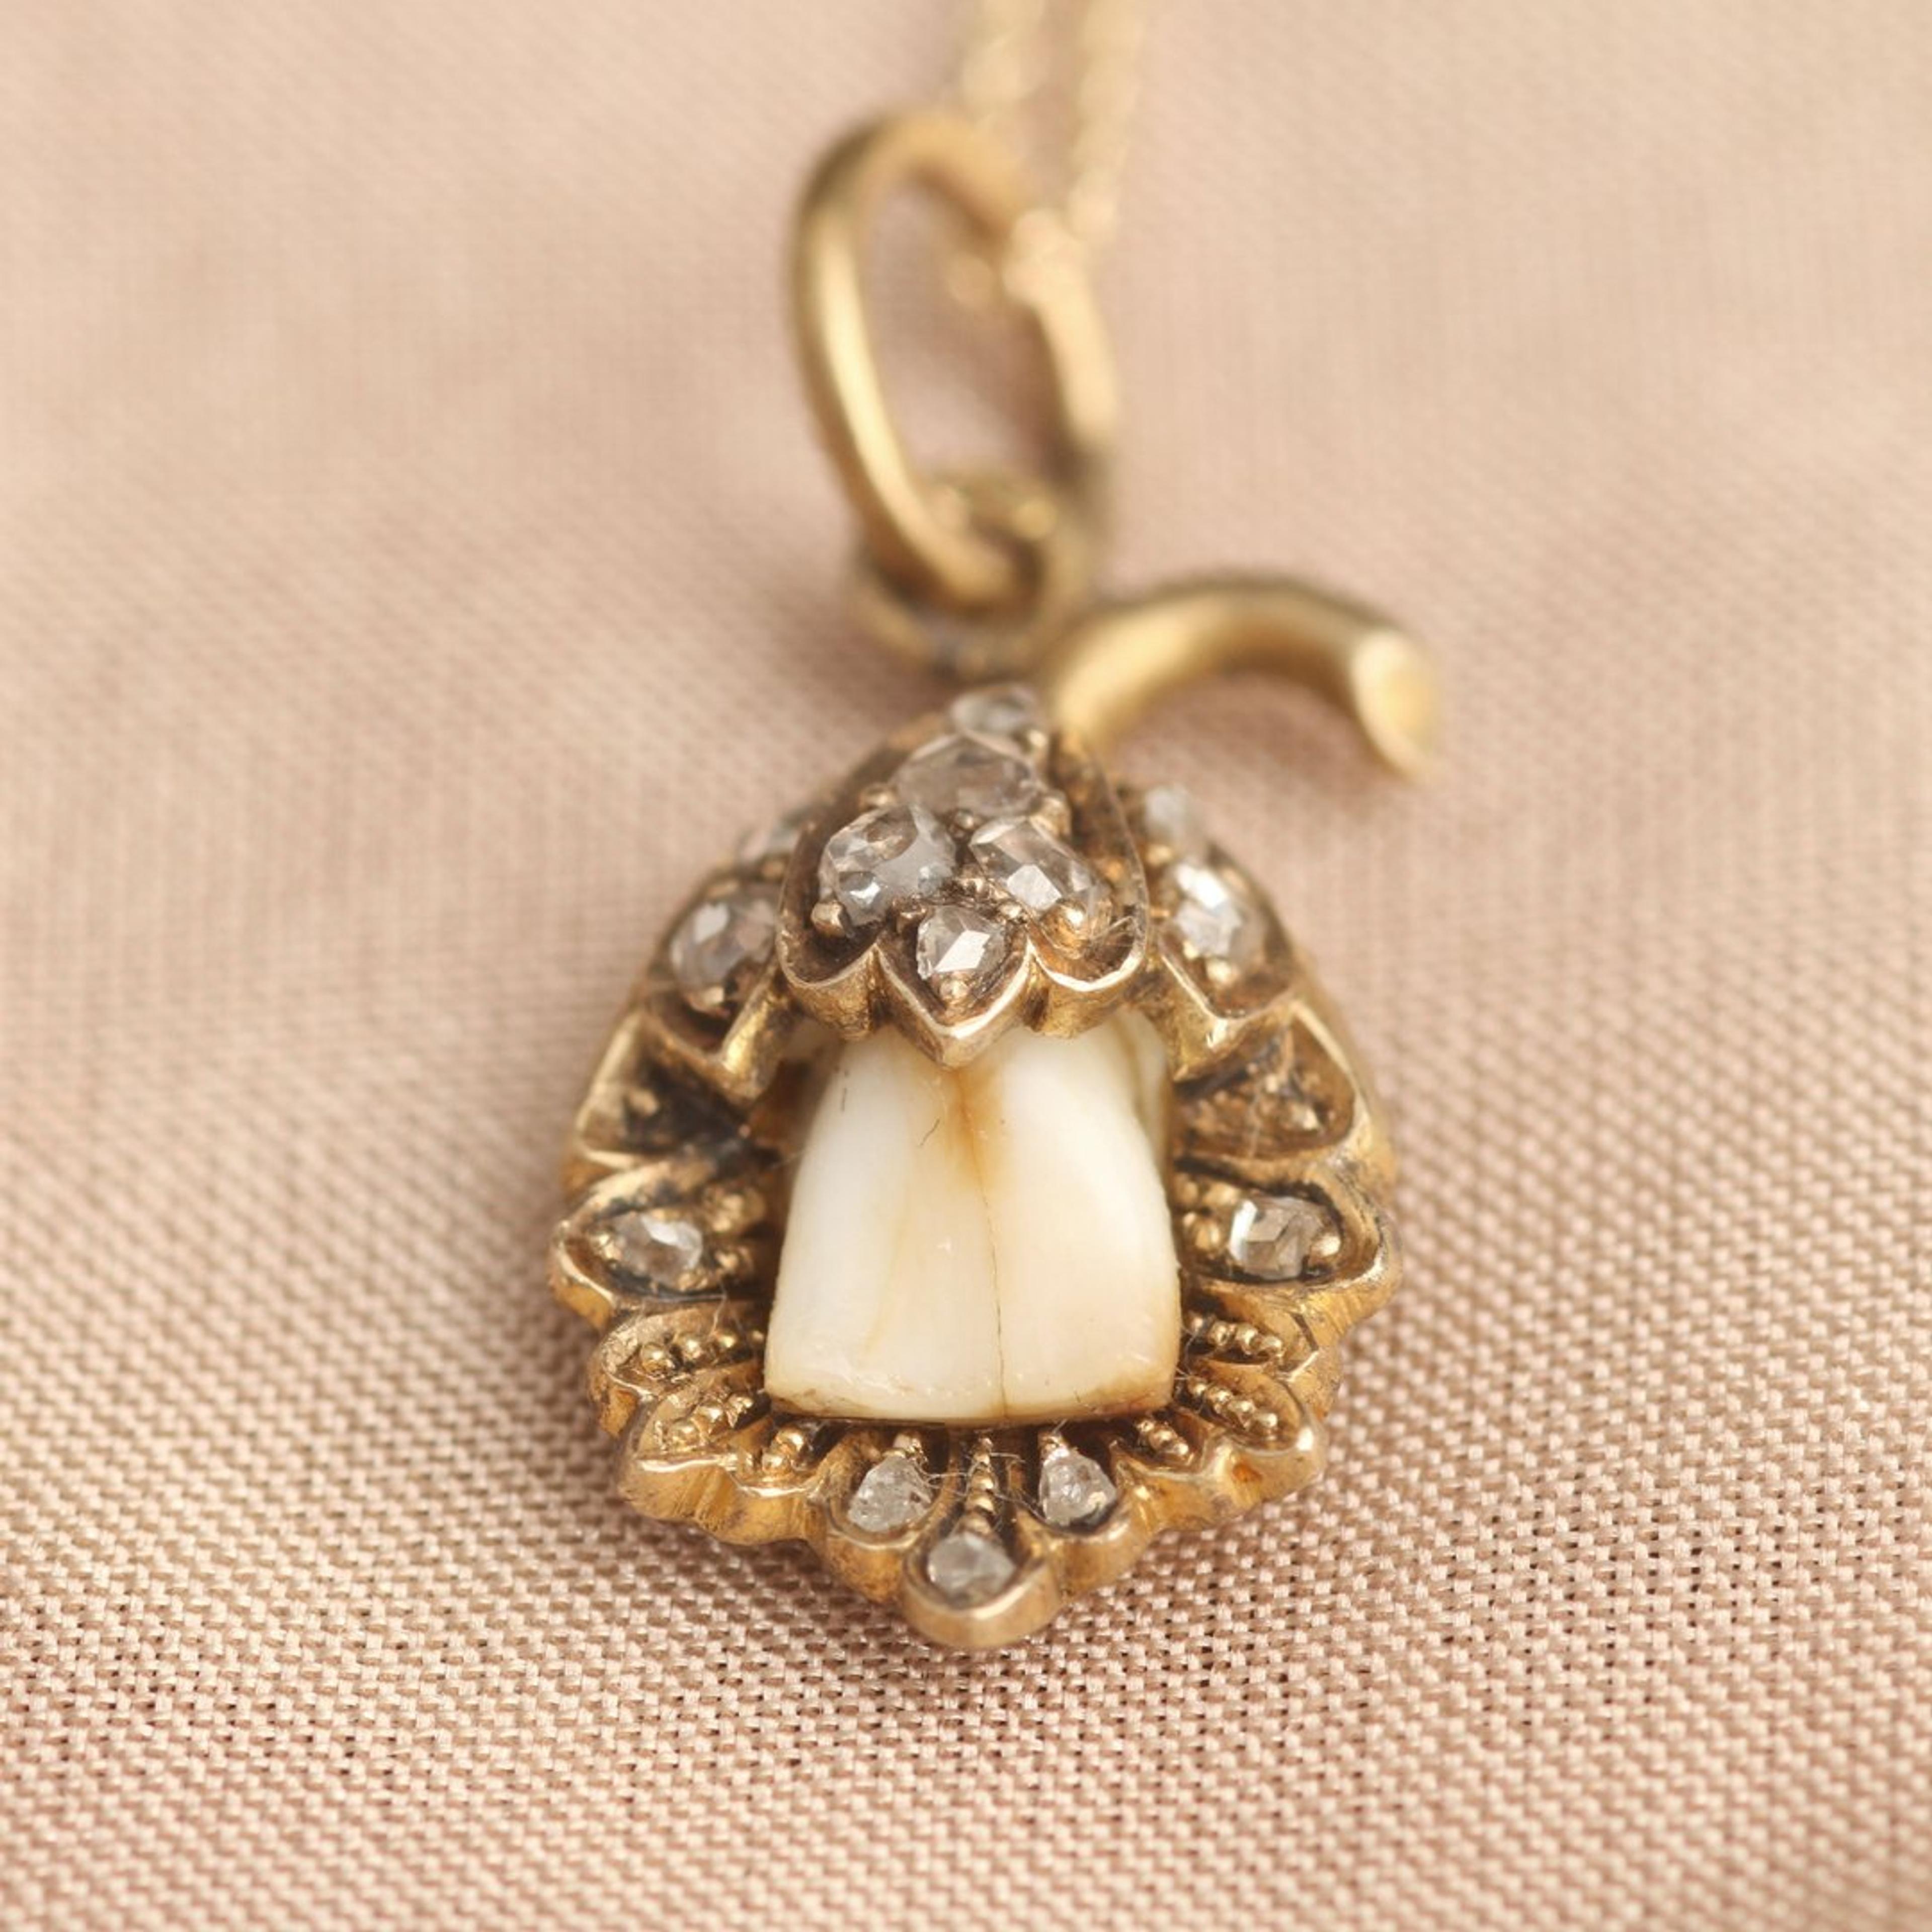 Detail of Victorian Milk Tooth in Ornate Floral Mounting with Rose Cut Diamonds